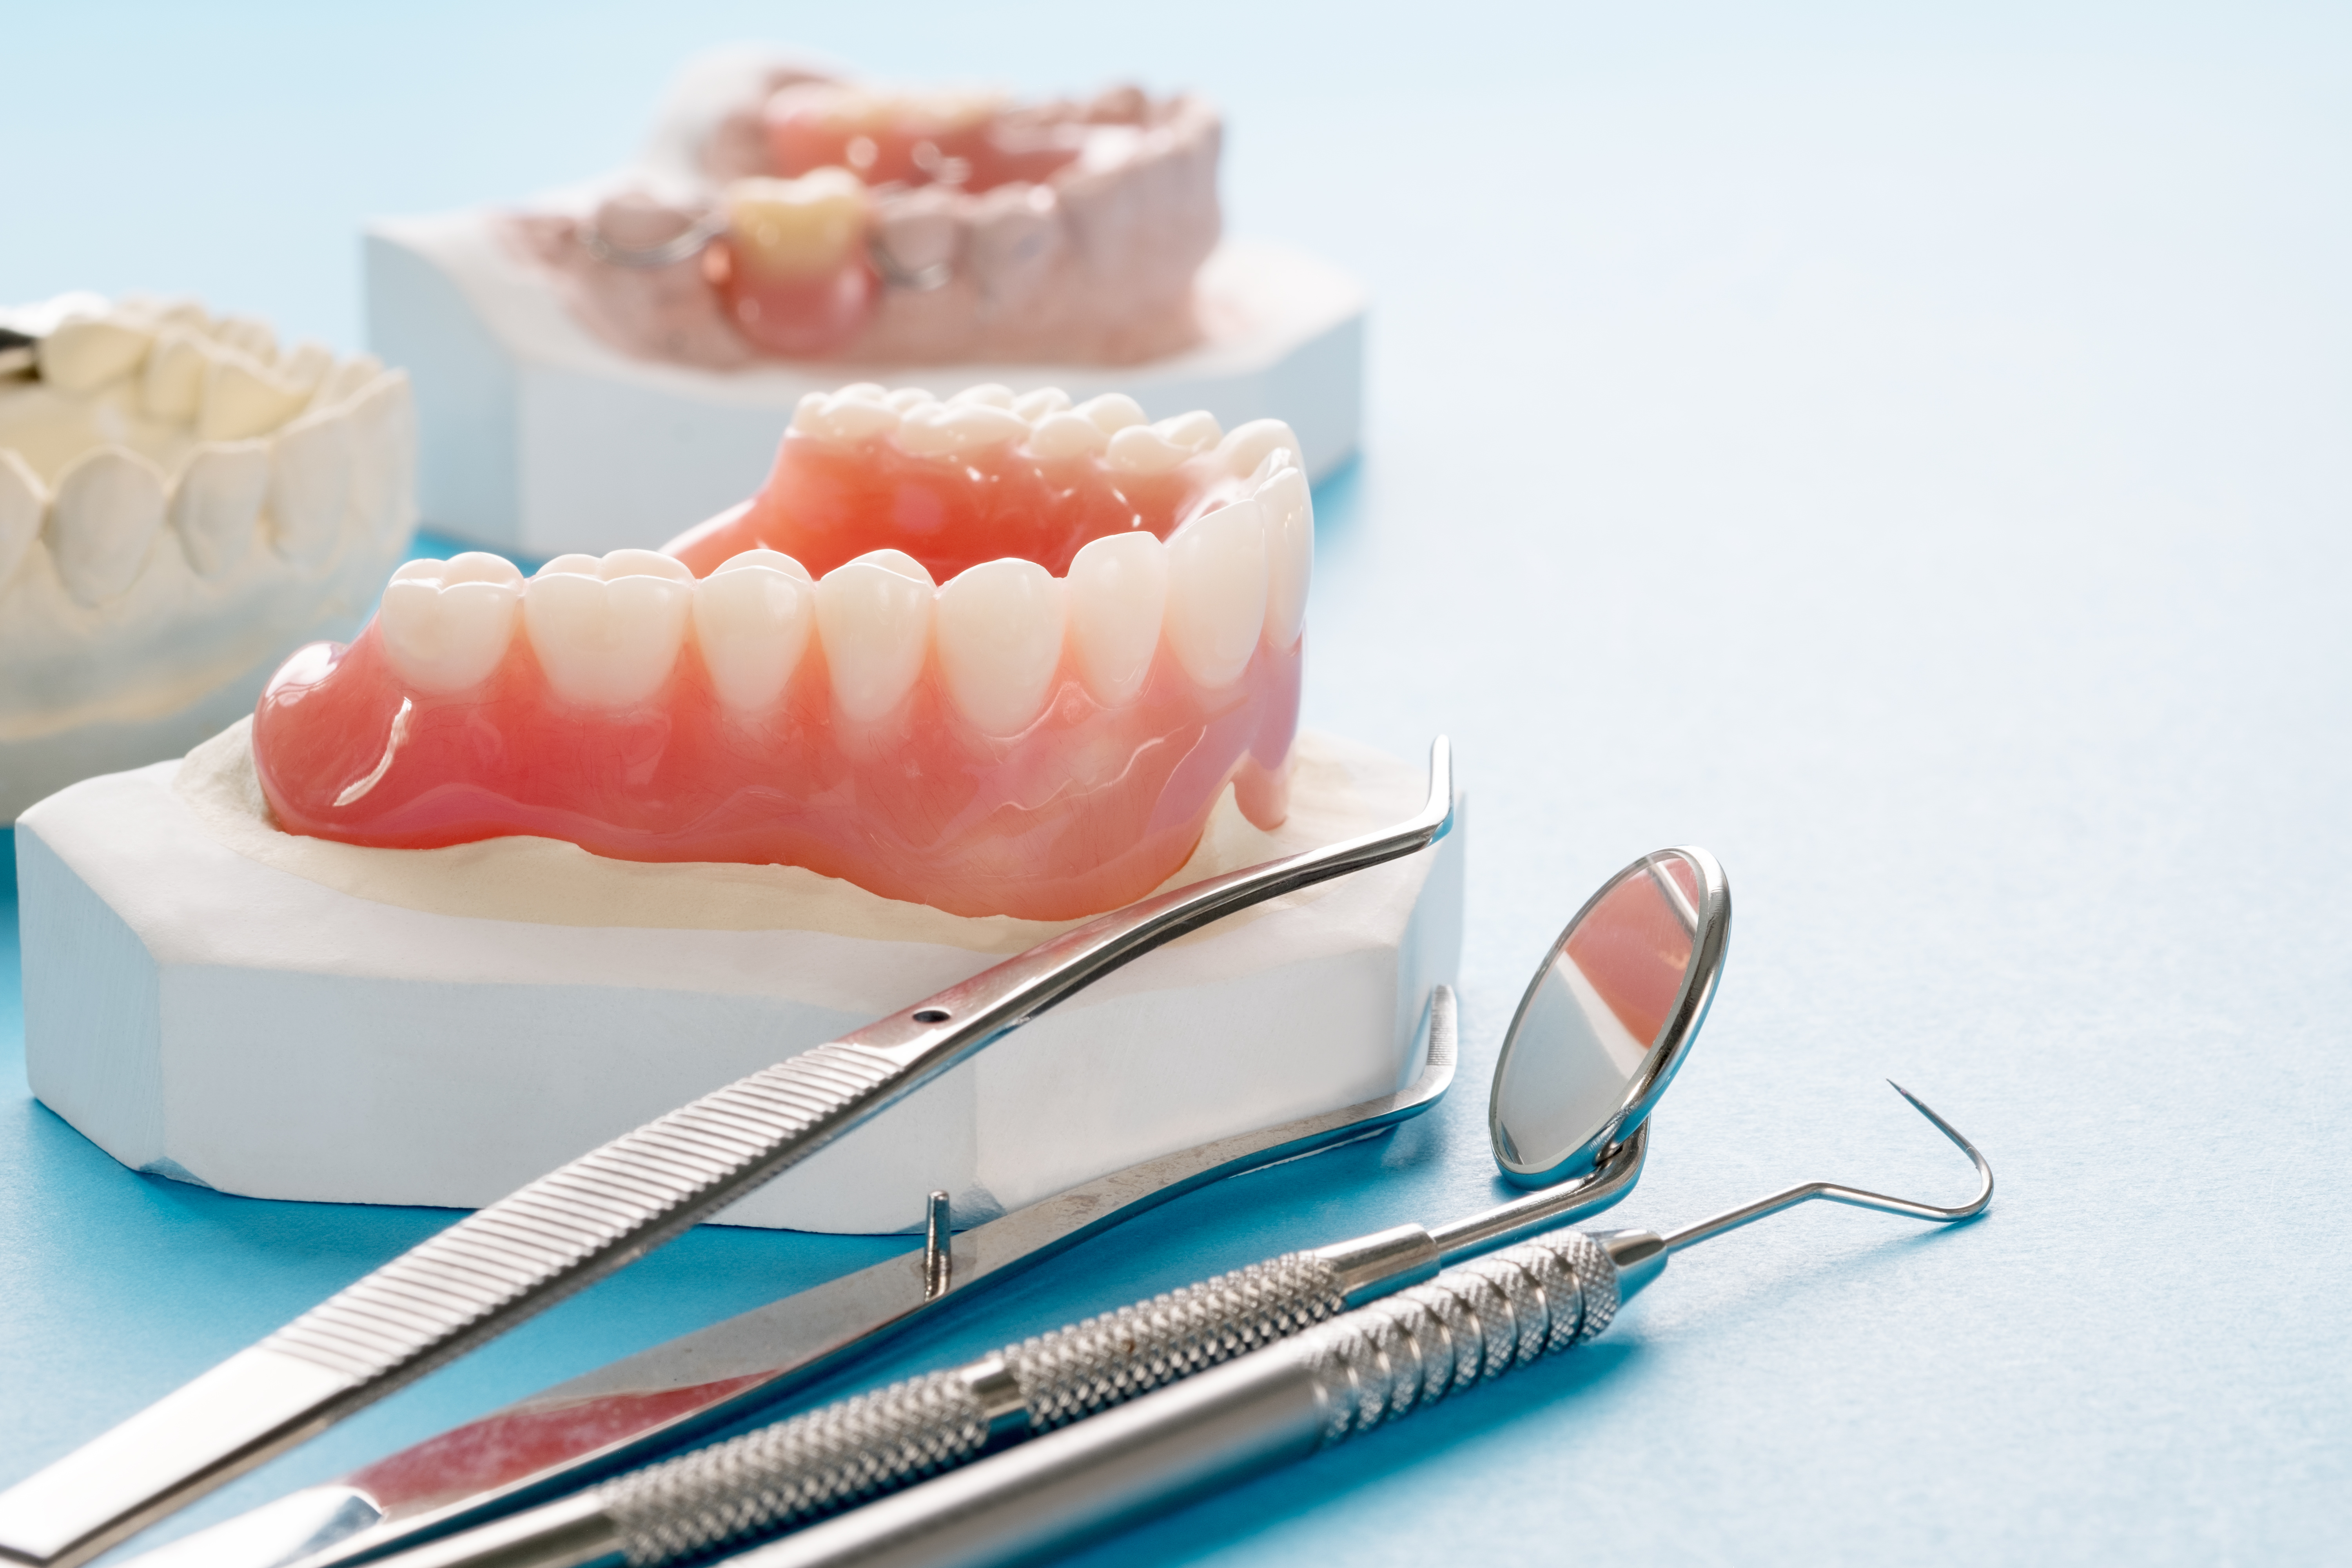 What are the different types of dentures - Complete removable dentures